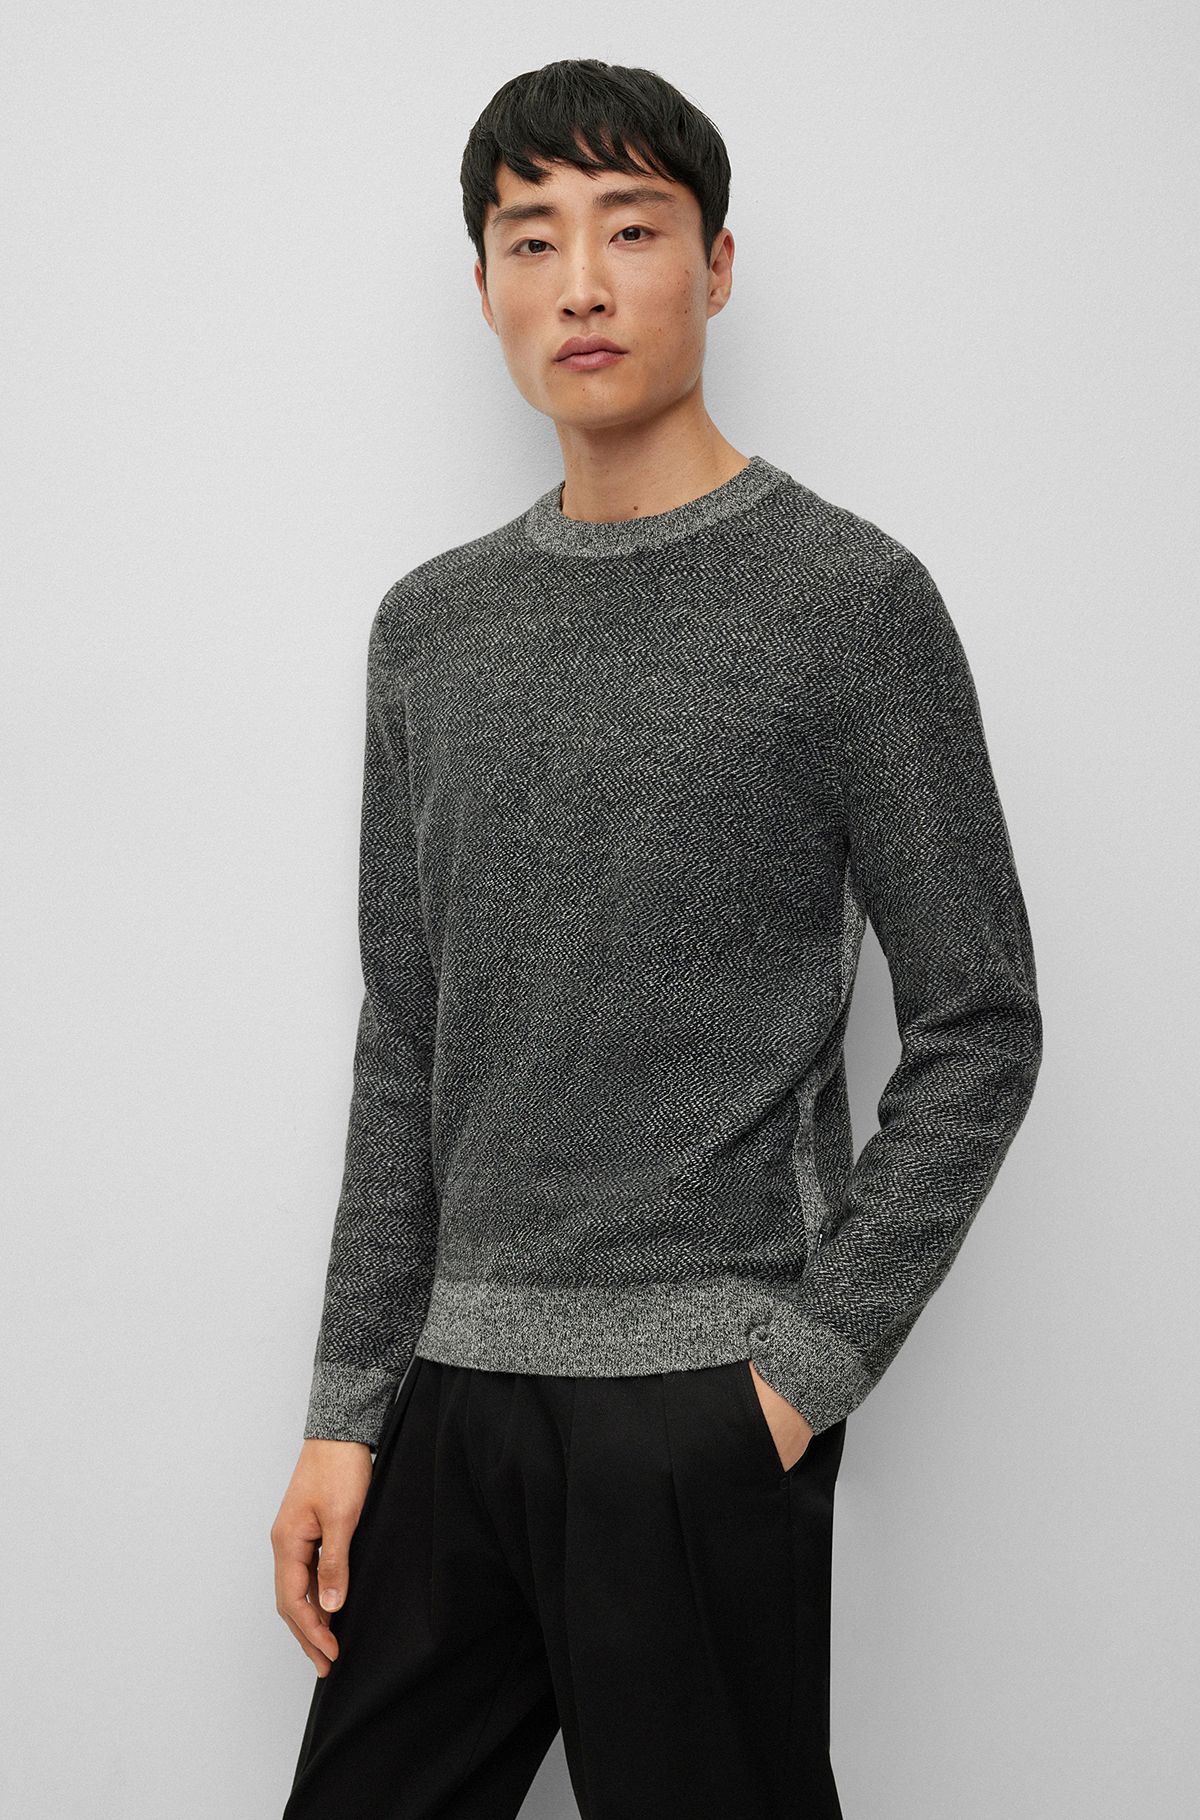 Regular-fit sweater with herringbone structure and ribbed cuffs, Black